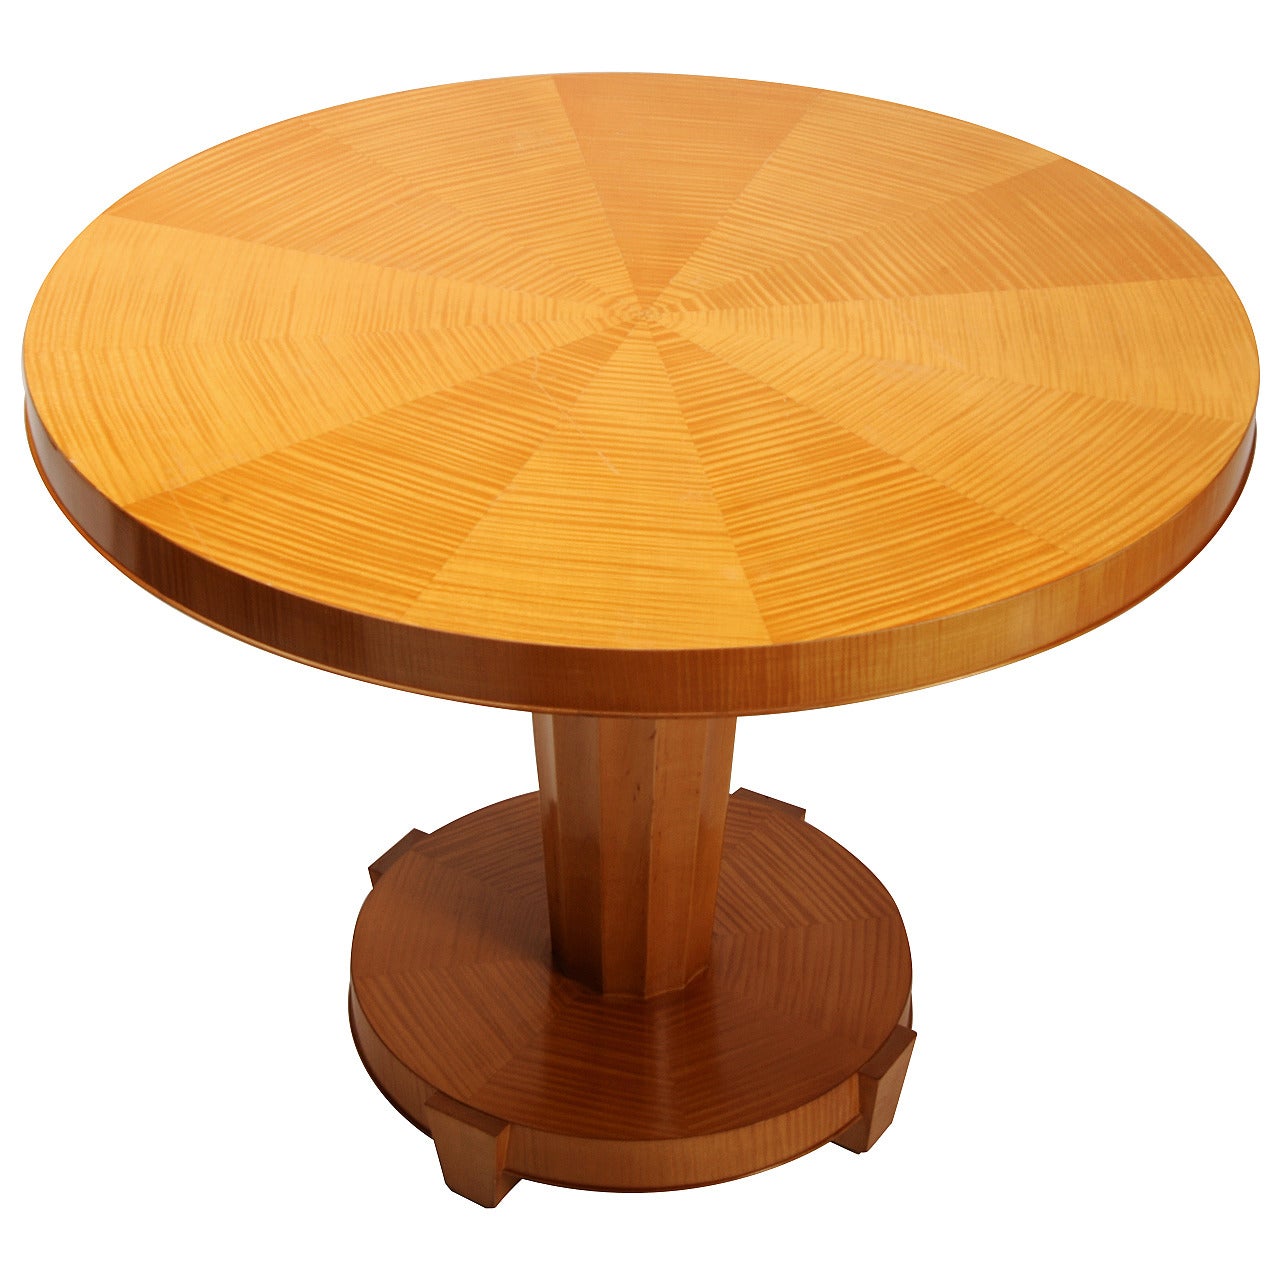 Round Tiger Maple Center or Club Table by Baker